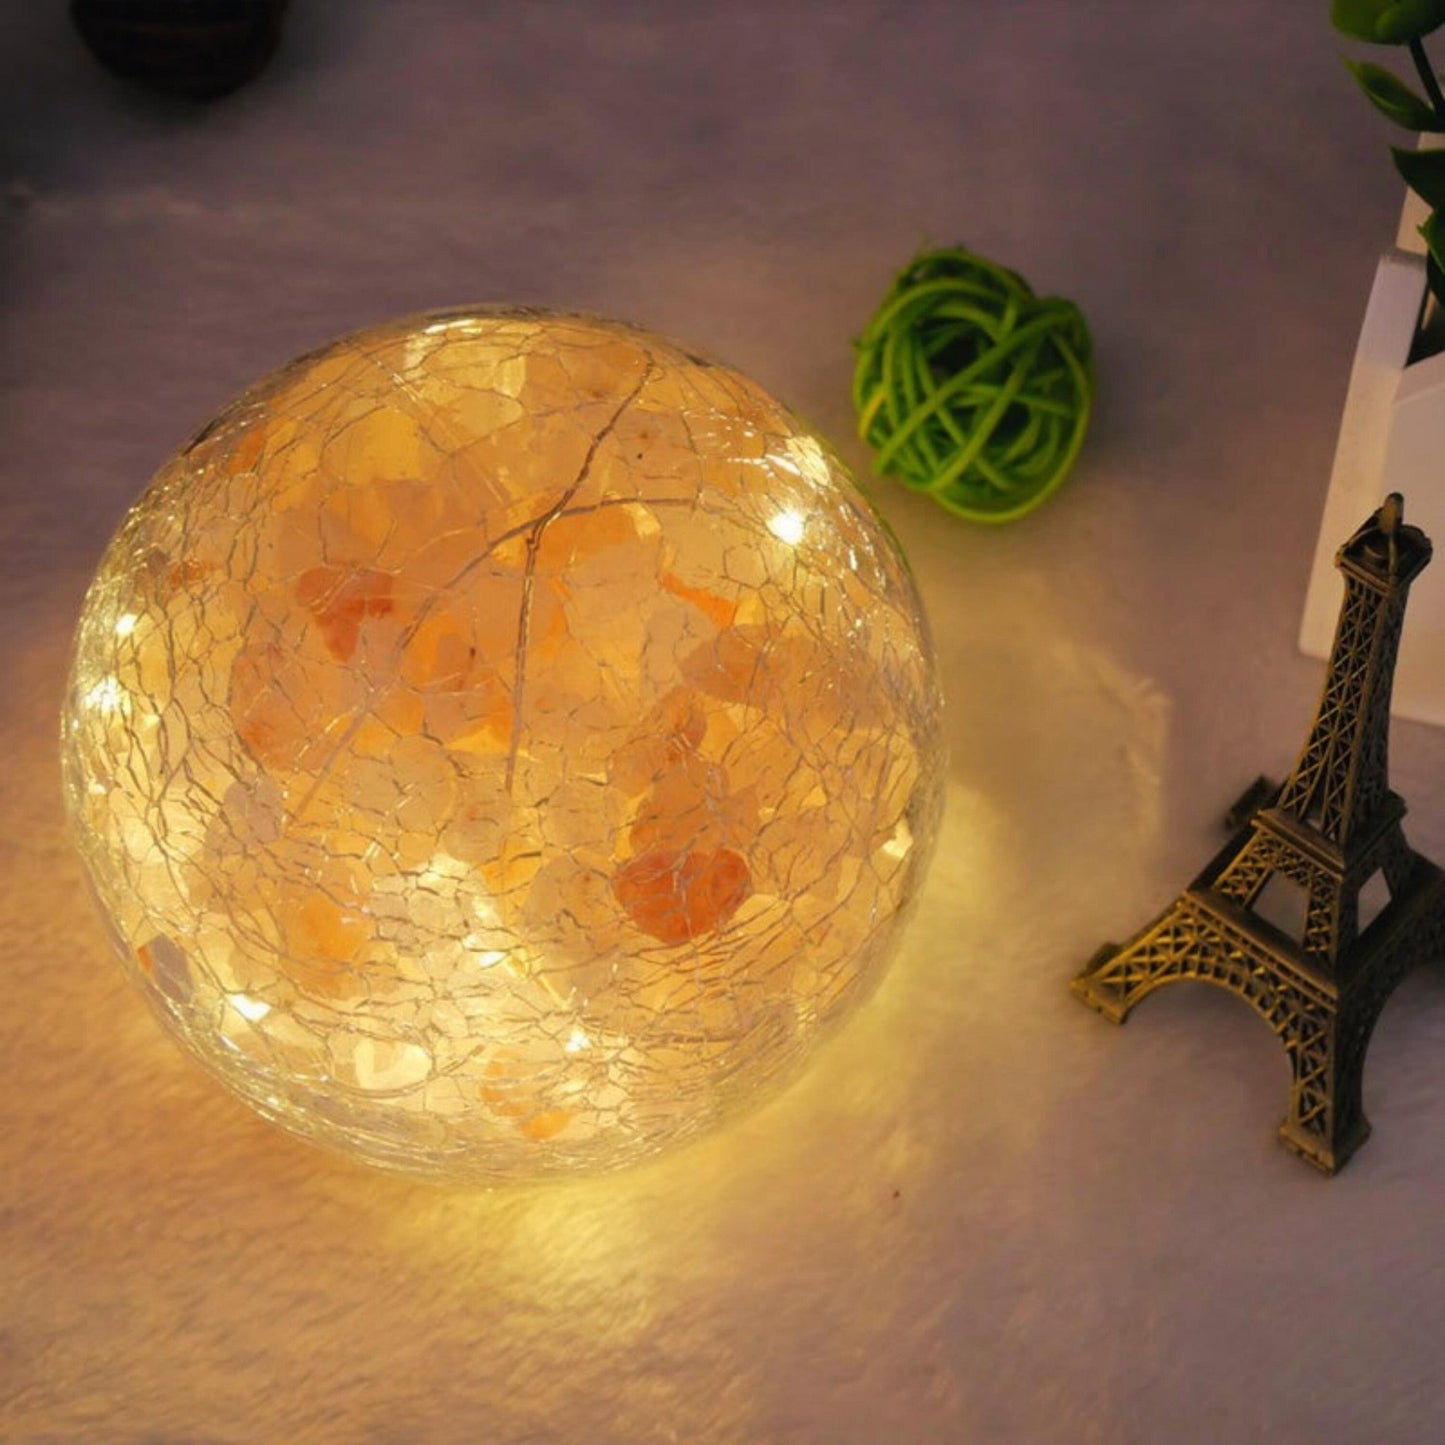 Planet Himalayan Salt Lamp - Space Mesmerise - Space Gifts | Lamps | Statues | Home Decor